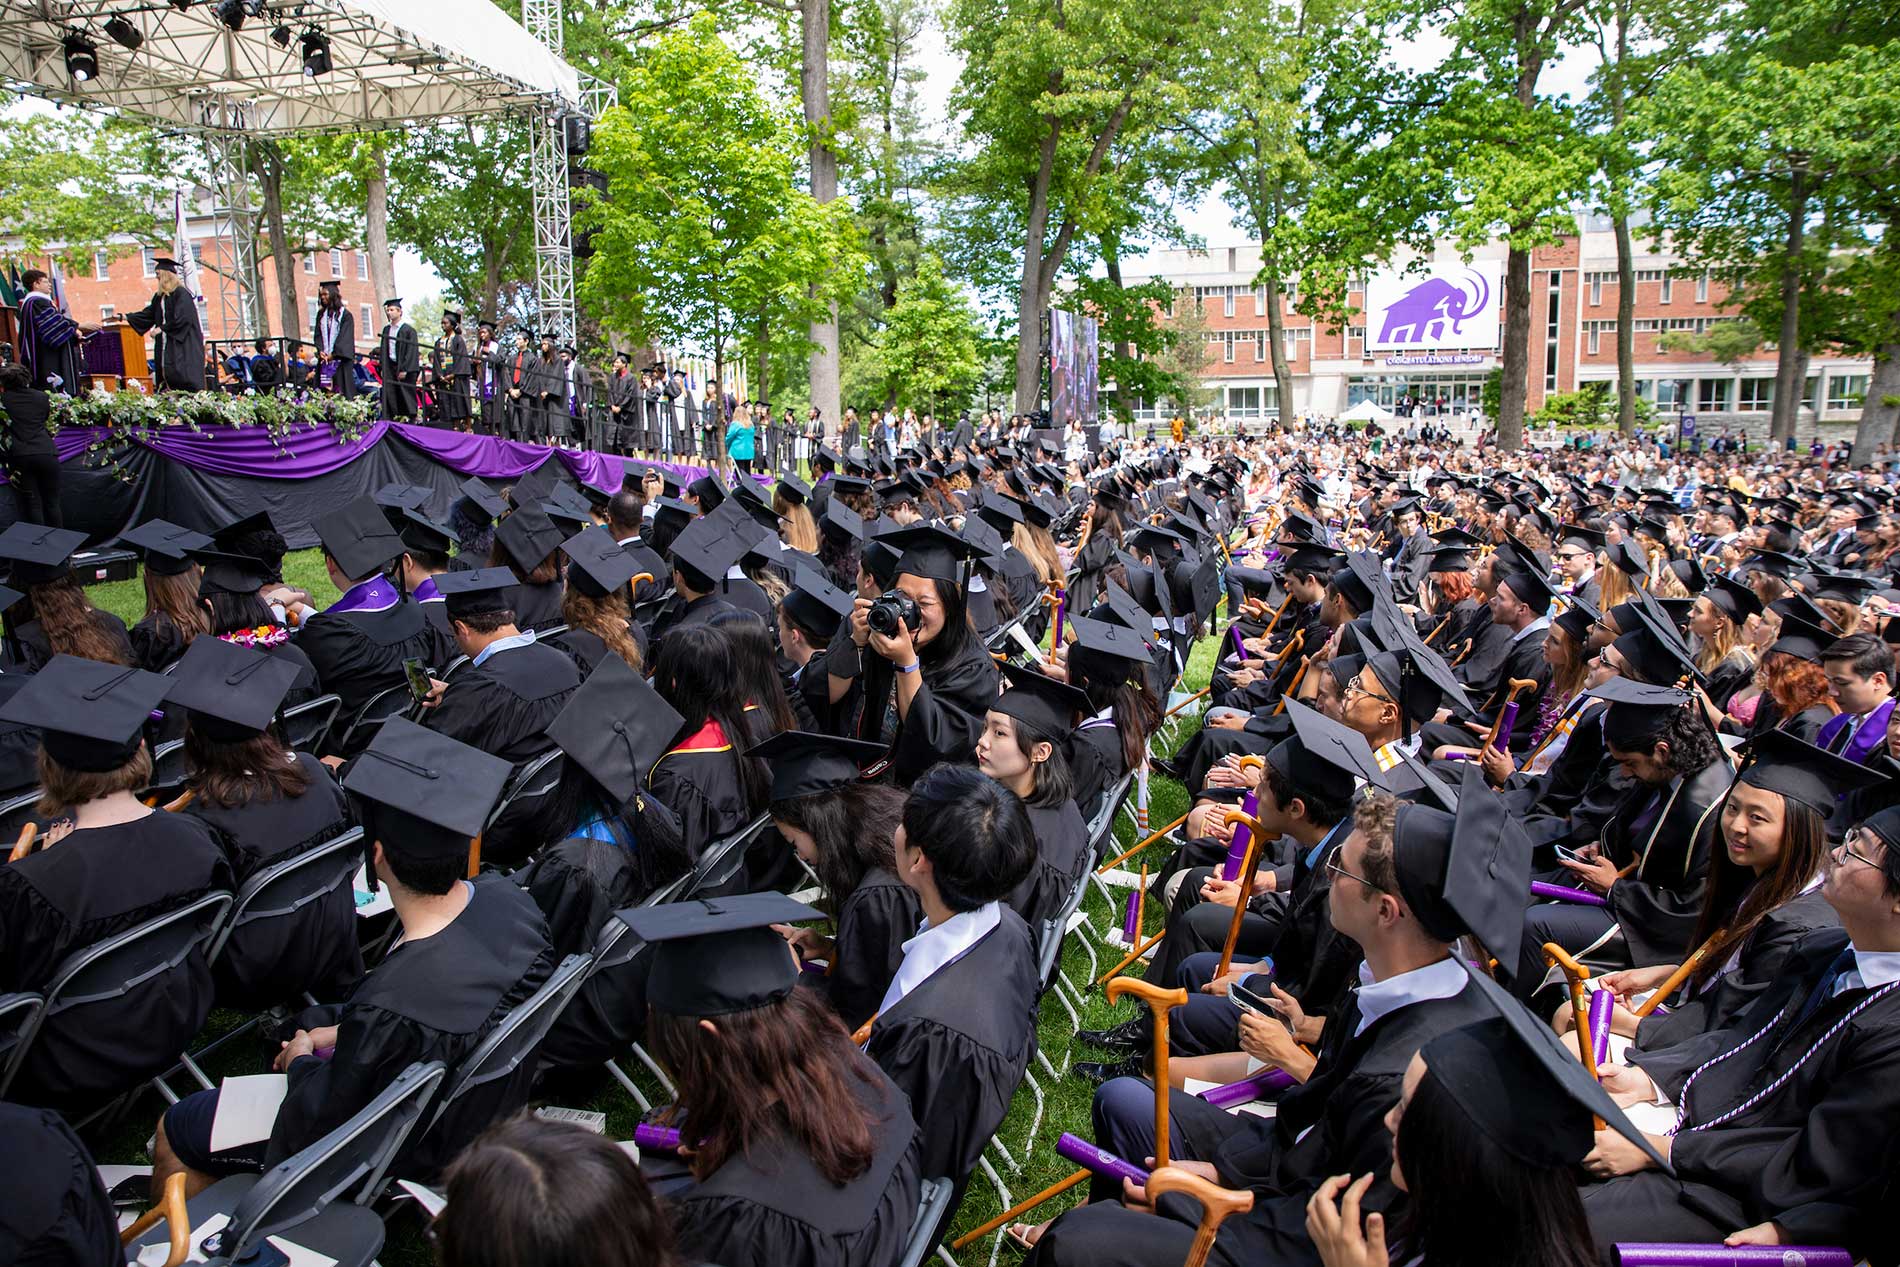 Amherst College graduates sit in the audience, awaiting the awarding of degrees.